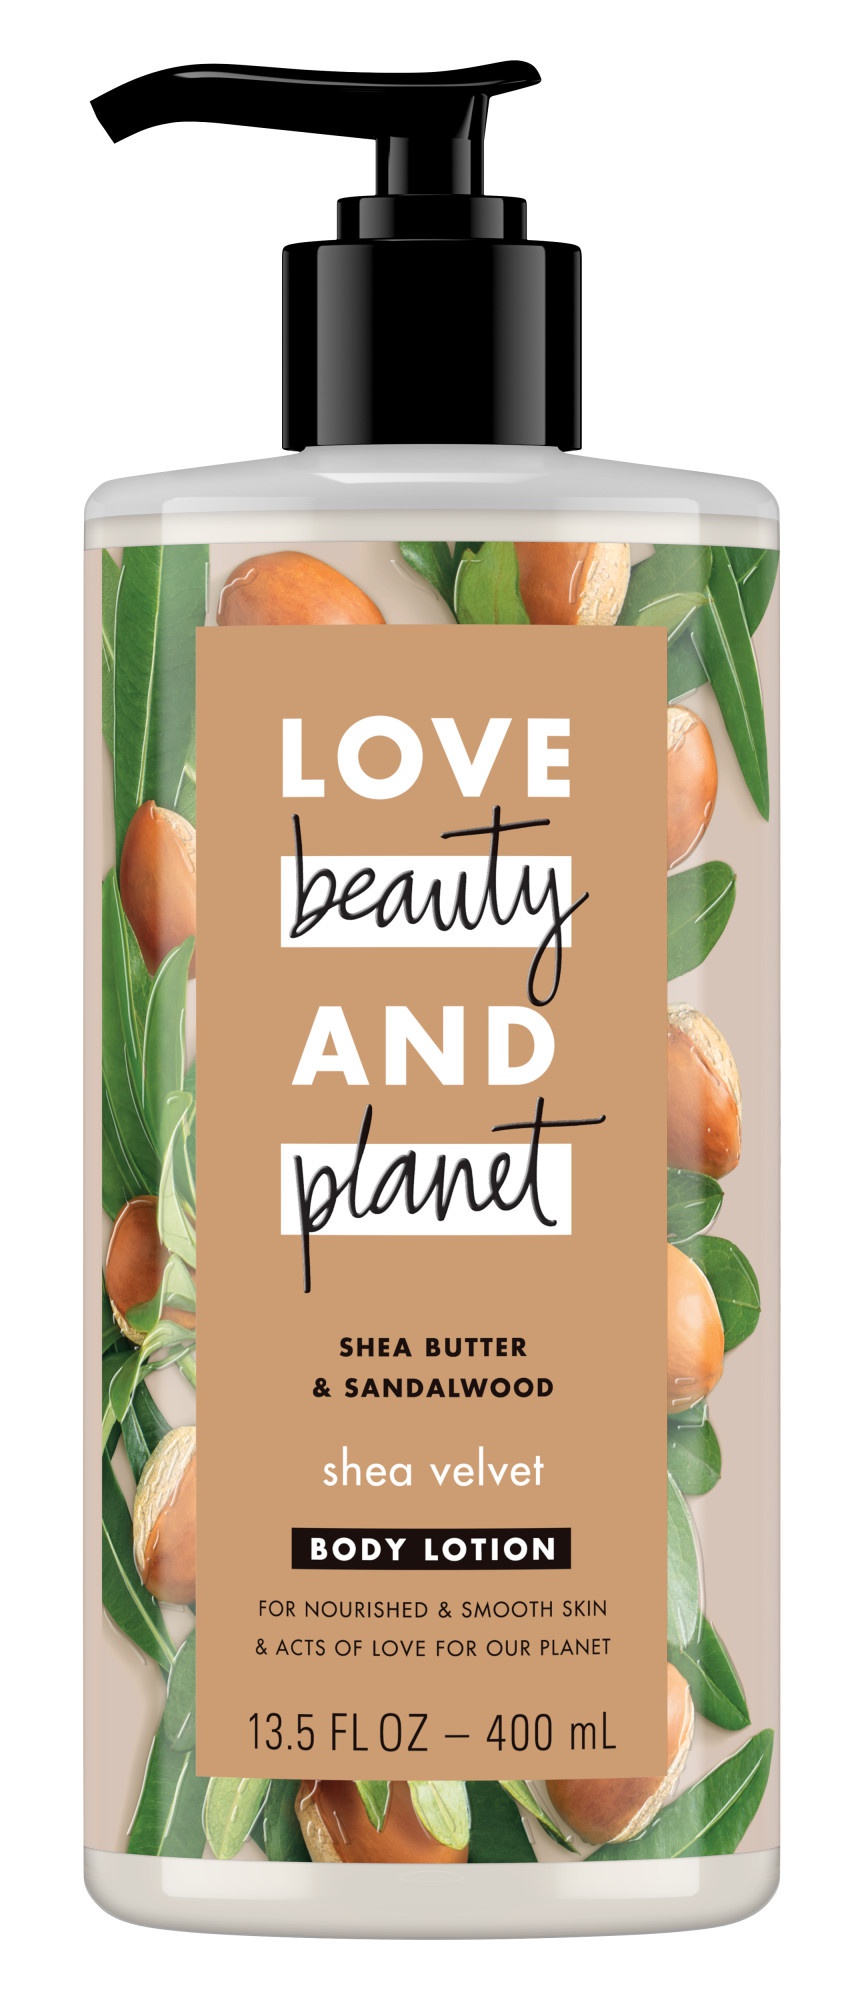 Love beauty and planet Shea Butter & Sandalwood Body Lotion